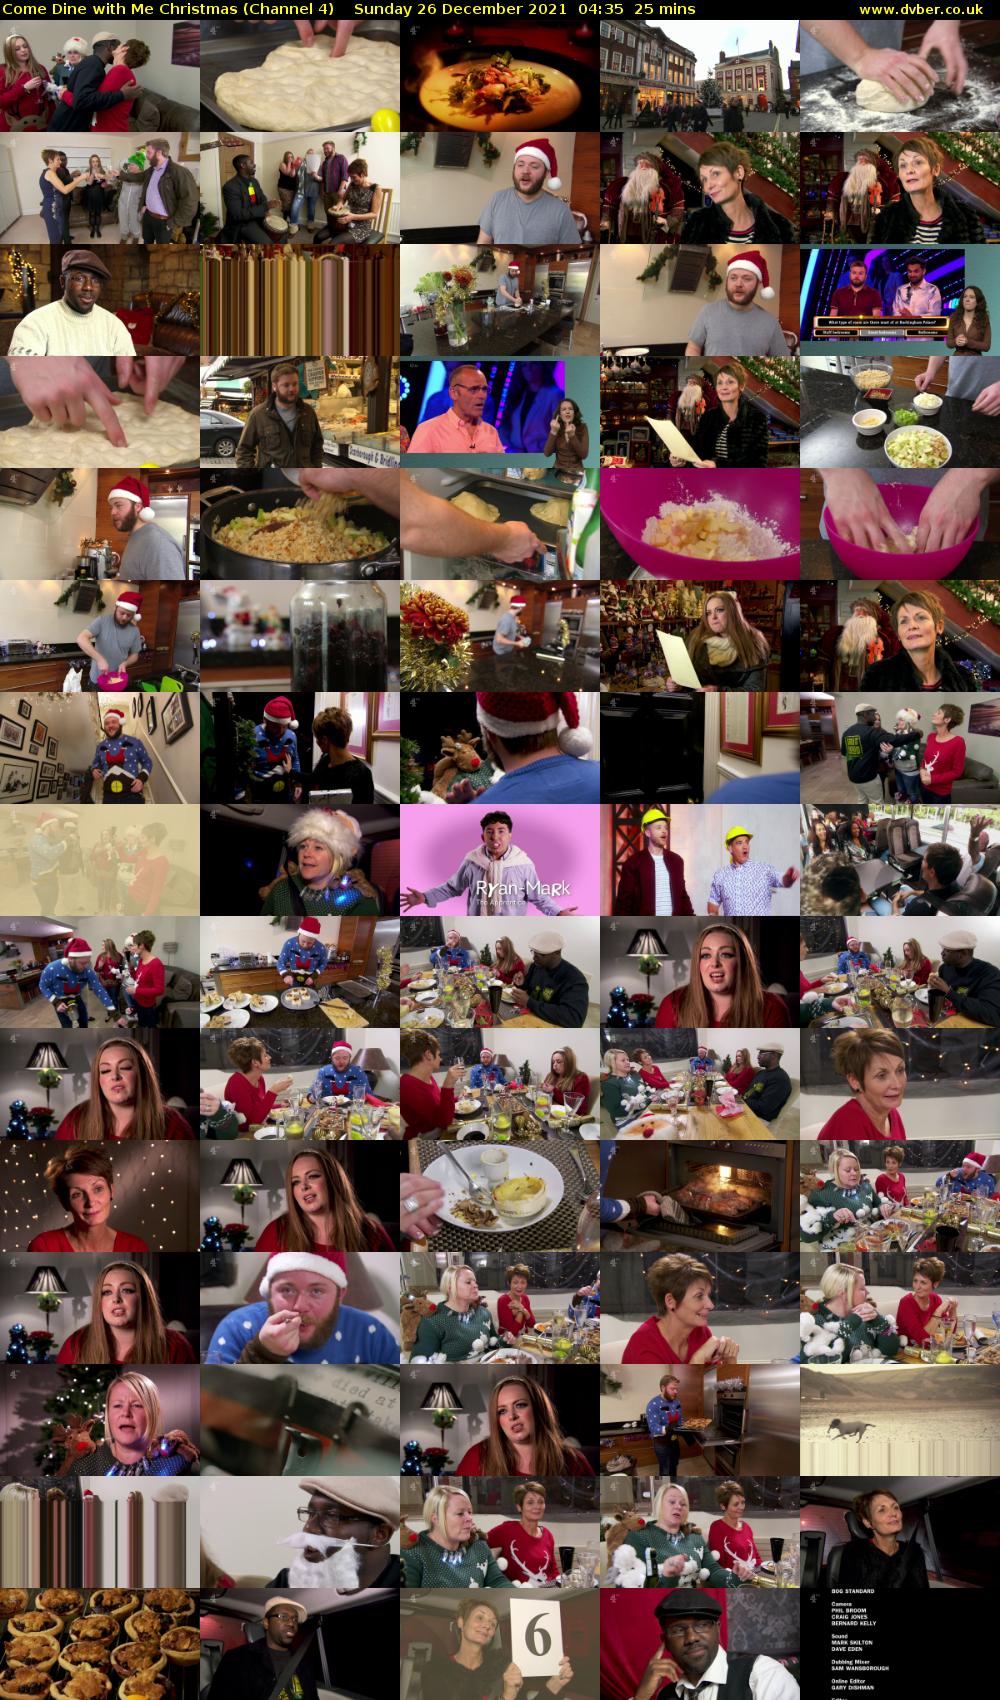 Come Dine with Me Christmas (Channel 4) Sunday 26 December 2021 04:35 - 05:00